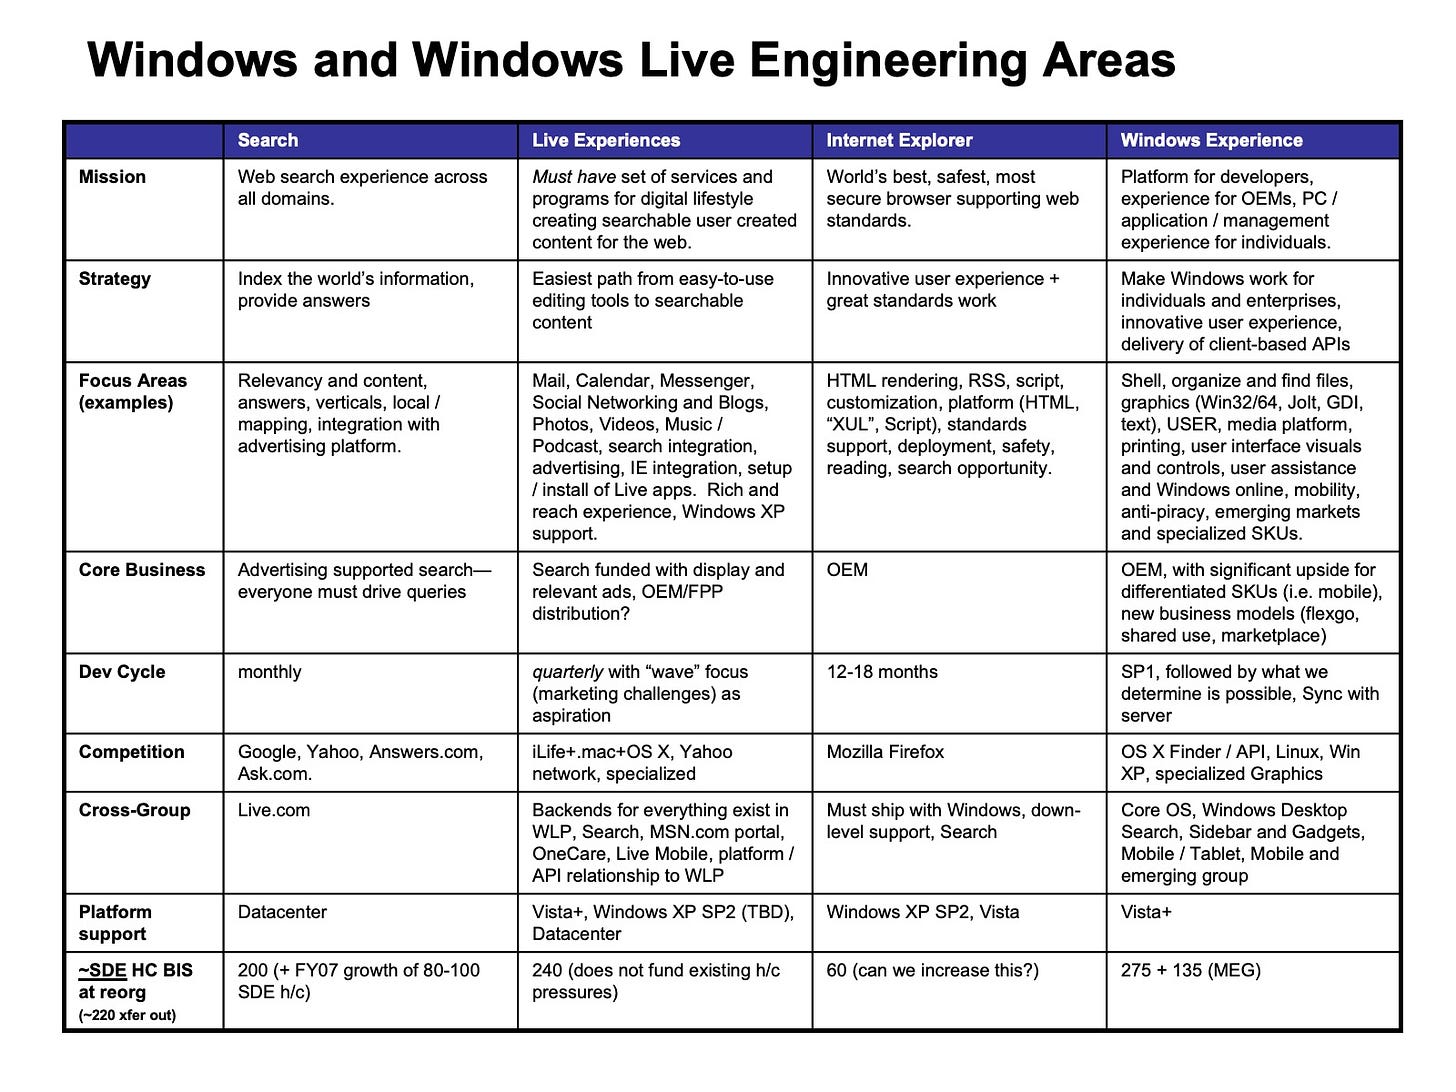 Windows and Windows Live Engineering Areas Mission Search Web search experience across all domains. Strategy Index the world's information, provide answers Focus Areas (examples) Relevancy and content, answers, verticals, local / mapping, integration with advertising platform. Core Business Dev Cycle Competition Cross-Group Advertising supported search- everyone must drive queries monthly Google, Yahoo, Answers.com, Ask.com. Live.com Platform support ~SDE HC BIS at reorg (~220 xfer out) Datacenter 200 (+ FY07 growth of 80-100 SDE h/c) Live Experiences Must have set of services and programs for digital lifestyle creating searchable user created content for the web. Easiest path from easy-to-use editing tools to searchable content Mail. Calendar, Messenger, Social Networking and Blogs, Photos, Videos, Music / Podcast, search integration, advertising, IE integration, setup / install of Live apps. Rich and reach experience, Windows XP support. Search funded with display and relevant ads, OEM/FPP distribution? quarterly with "wave" focus (marketing challenges) as aspiration iLife+.mac+OS X, Yahoo network, specialized Backends for everything exist in WLP. Search, MSN.com portal, OneCare, Live Mobile, platform / API relationship to WLP Vista+, Windows XP SP2 (TBD), Datacenter 240 (does not fund existing h/c pressures) Internet Explorer World's best, safest, most secure browser supporting web standards. Innovative user experience + great standards work HTML rendering, RSS, script, customization, platform (HTML, "XUL", Script), standards support, deployment, safety, reading, search opportunity. OEM 12-18 months Mozilla Firefox Must ship with Windows, down- level support, Search Windows XP SP2, Vista 60 (can we increase this?) Windows Experience Platform for developers. experience for OEMs. PC / application / management experience for individuals. Make Windows work for individuals and enterprises, innovative user experience, delivery of client-based APls Shell, organize and find files, graphics (Win32/64, Jolt, GDI, text), USER, media platform, printing, user interface visuals and controls, user assistance and Windows online, mobility, anti-piracy, emerging markets and specialized SKUs. OEM, with significant upside for differentiated SKUs (i.e. mobile), new business models (flexgo, shared use, marketplace) SP1, followed by what we determine is possible, Sync with server OS X Finder / API, Linux, Win XP, specialized Graphics Core OS. Windows Desktop Search, Sidebar and Gadgets, Mobile / Tablet, Mobile and emerging group Vista+ 275 + 135 (MEG)